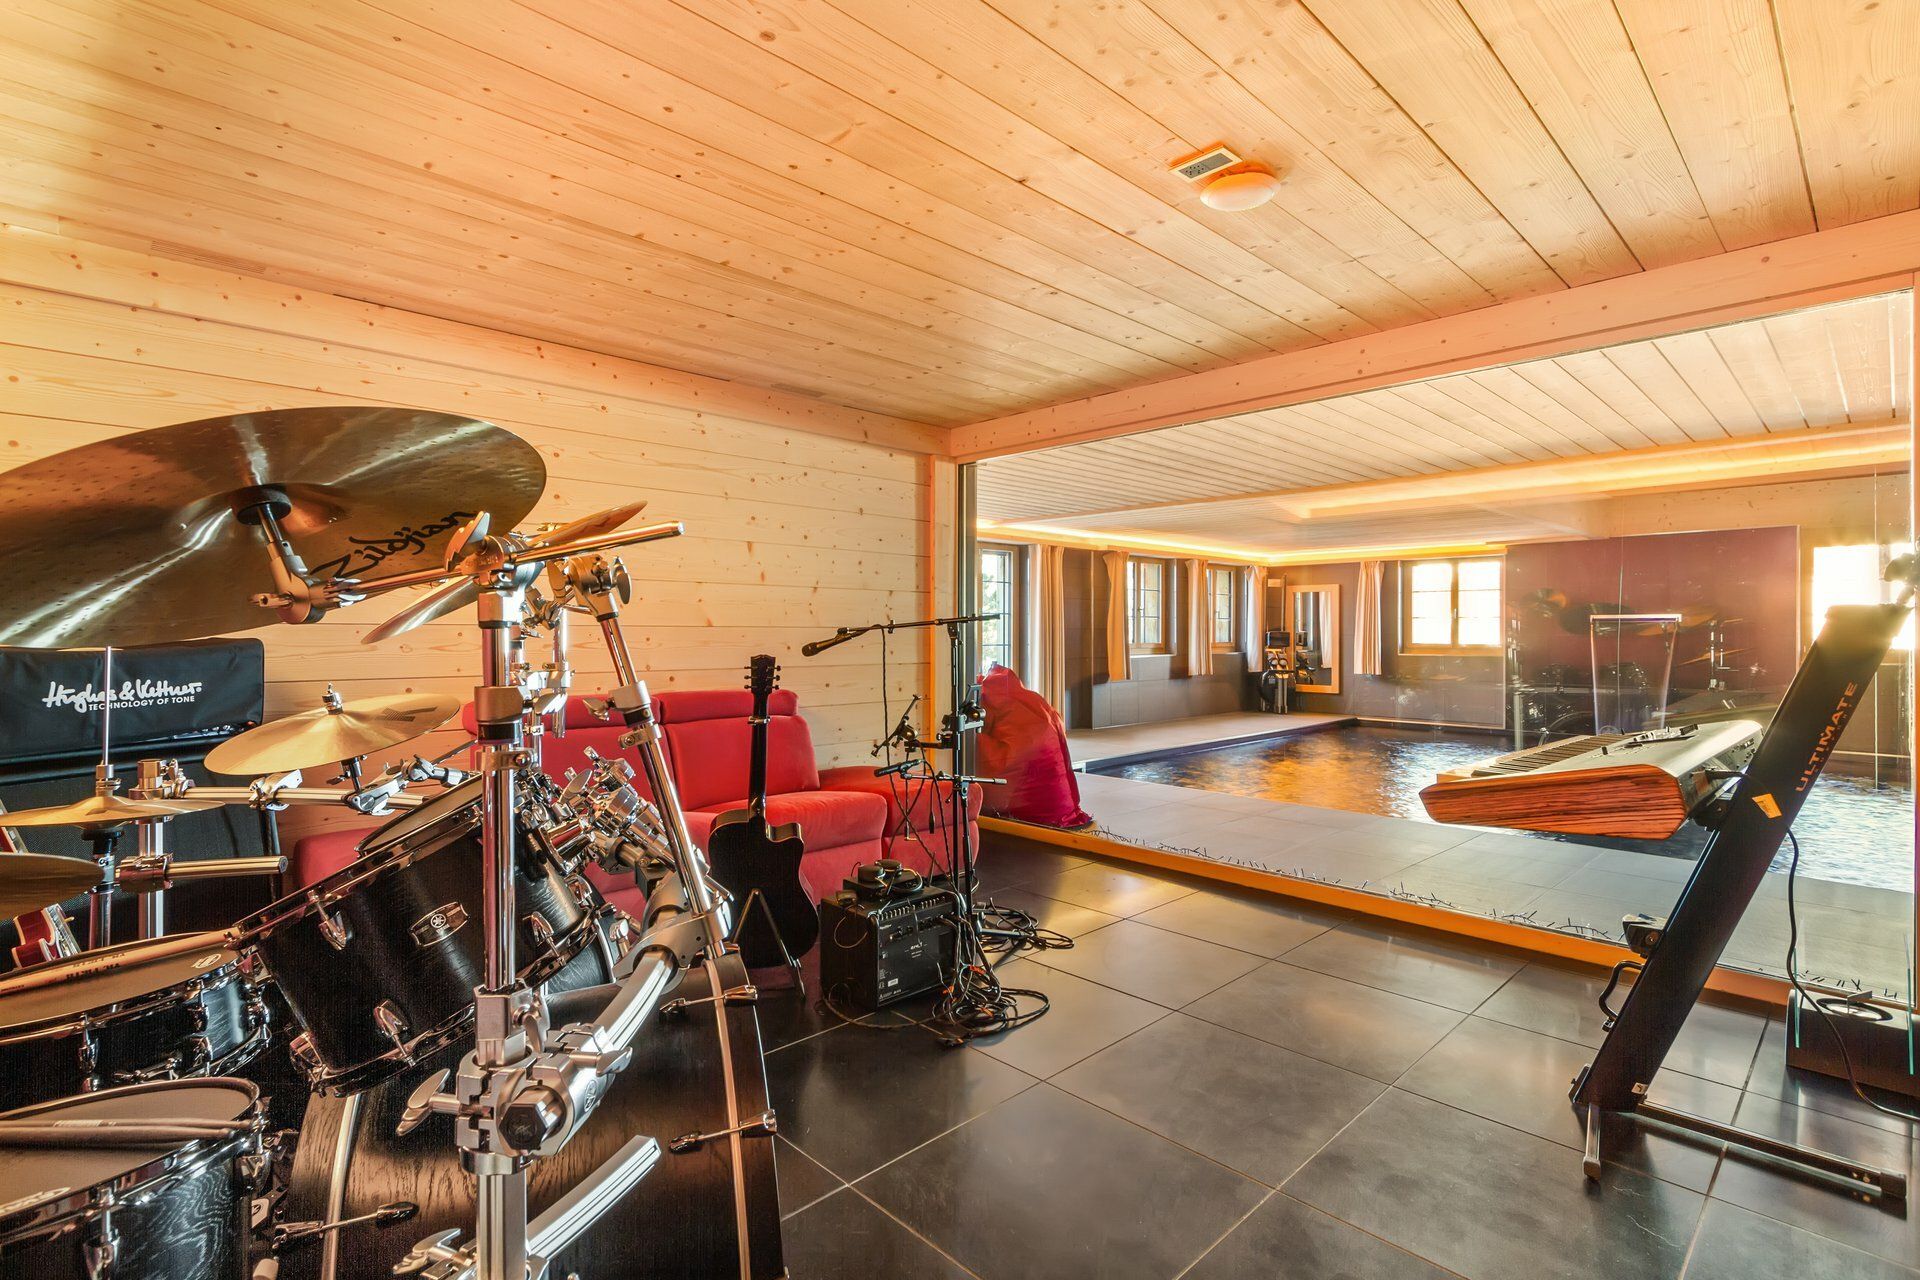 Music/fitness room with pool view